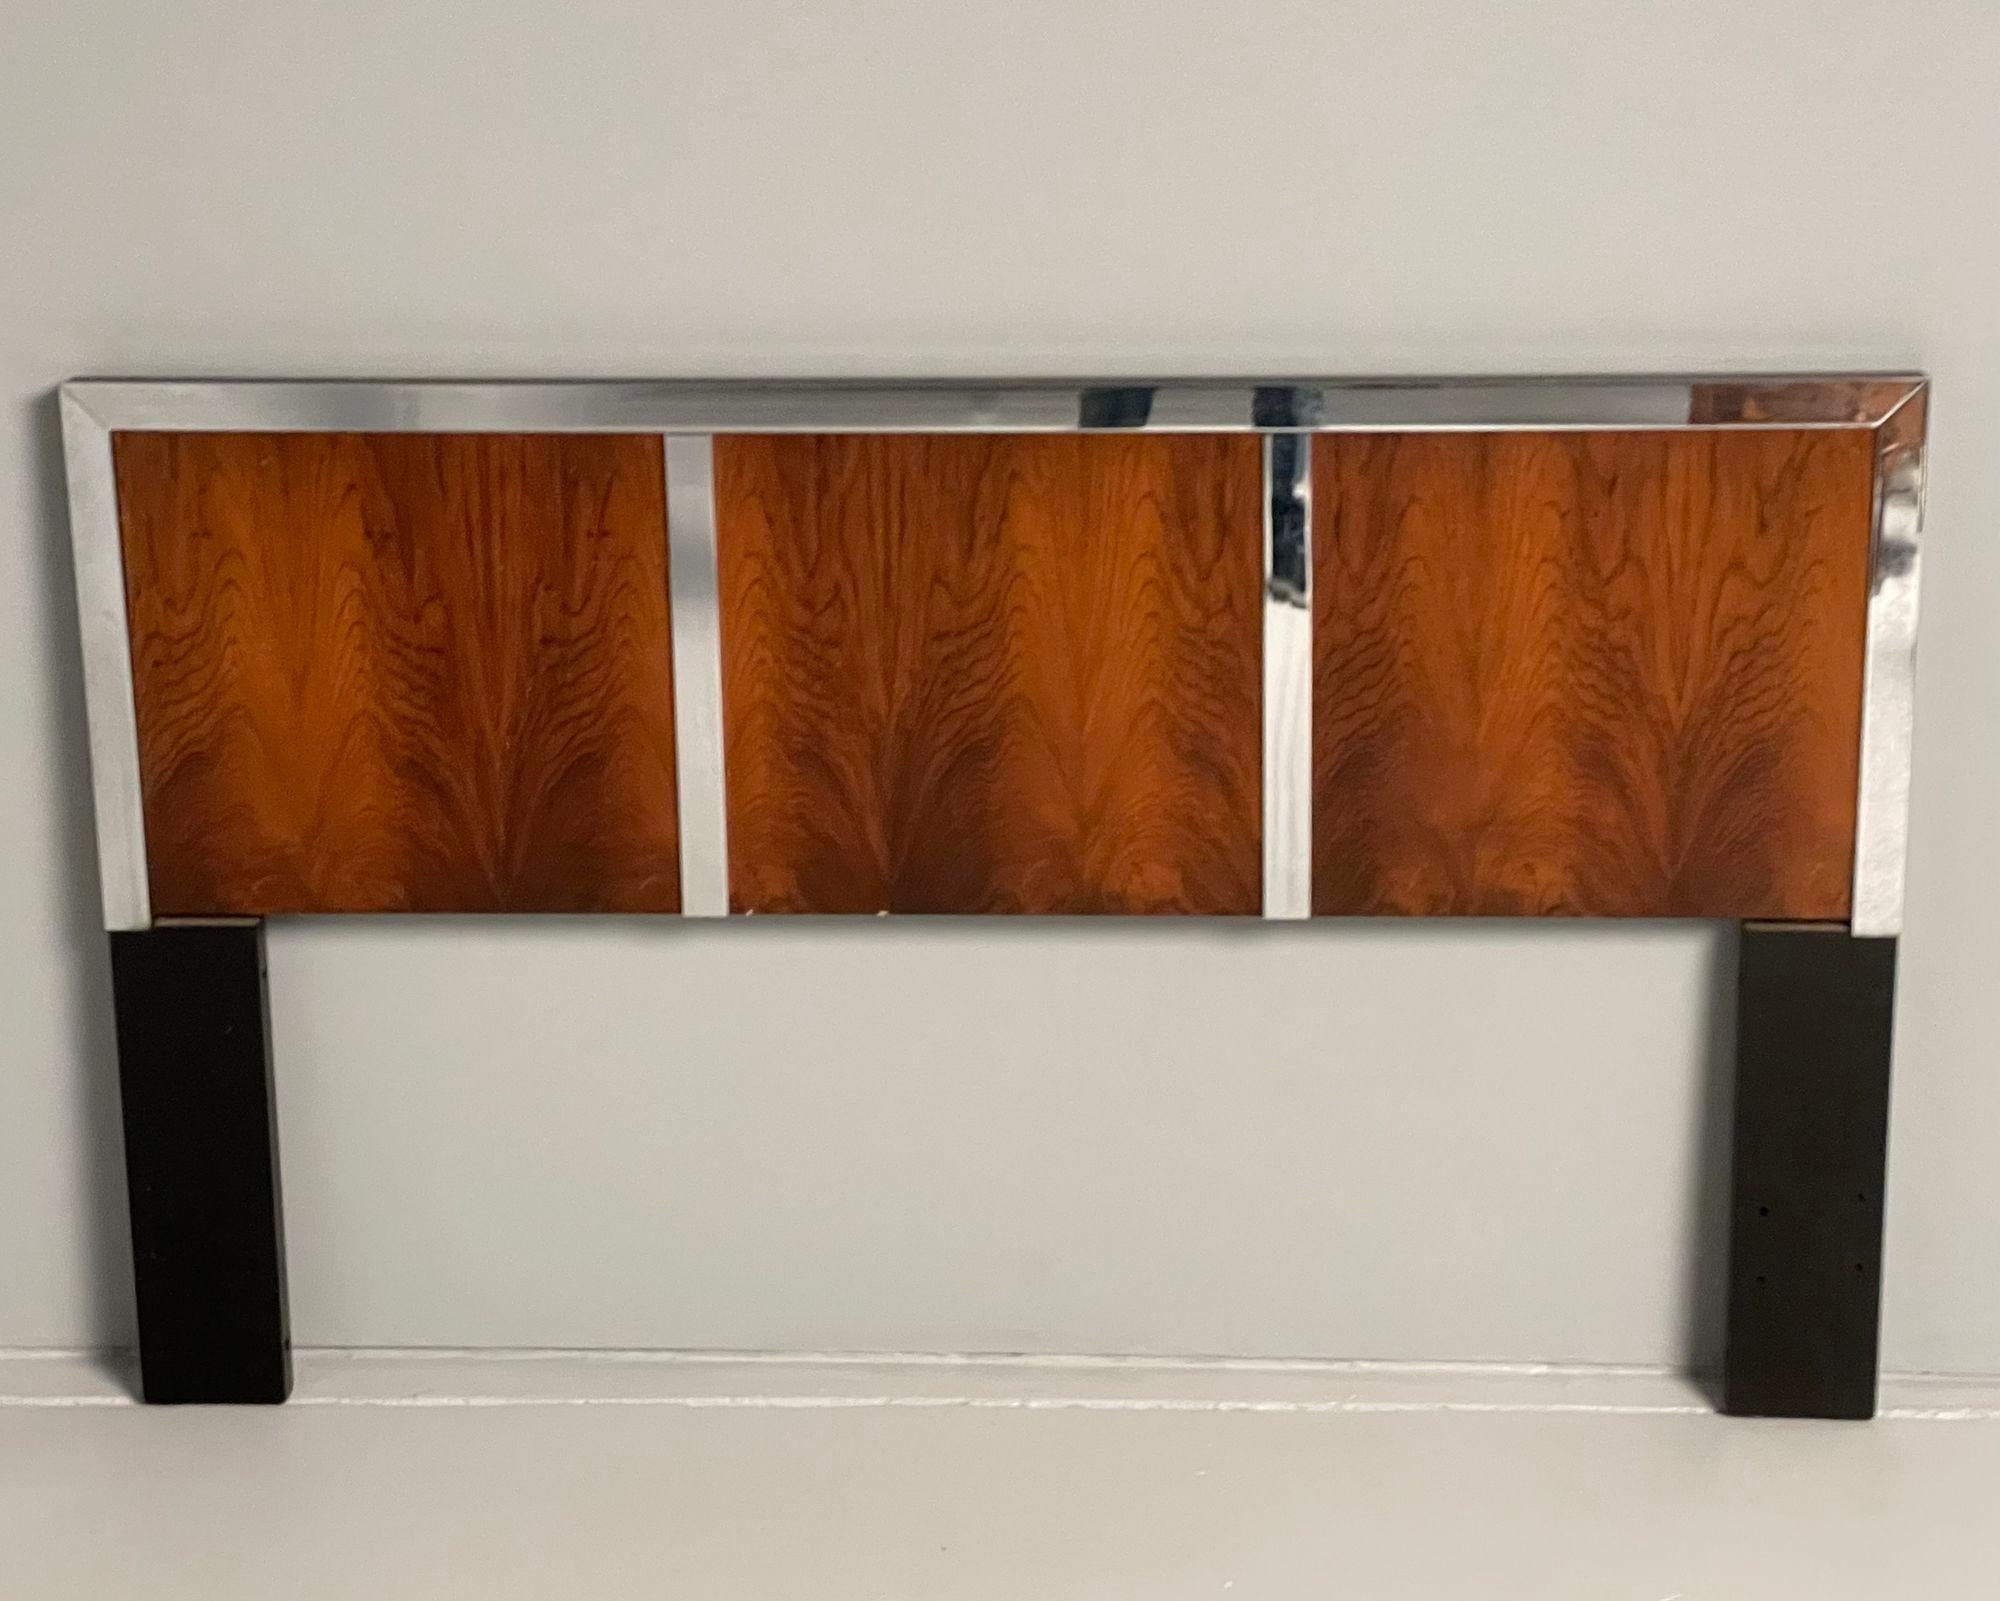 A Mid Century Modern Full Headboard, Milo Baughman, Chrome and Rosewood

Having a tri panel rosewood backsplash framed in a chrome design on ebony legs and sides. Good condition, minor scratches.

36H x 60W x 2D